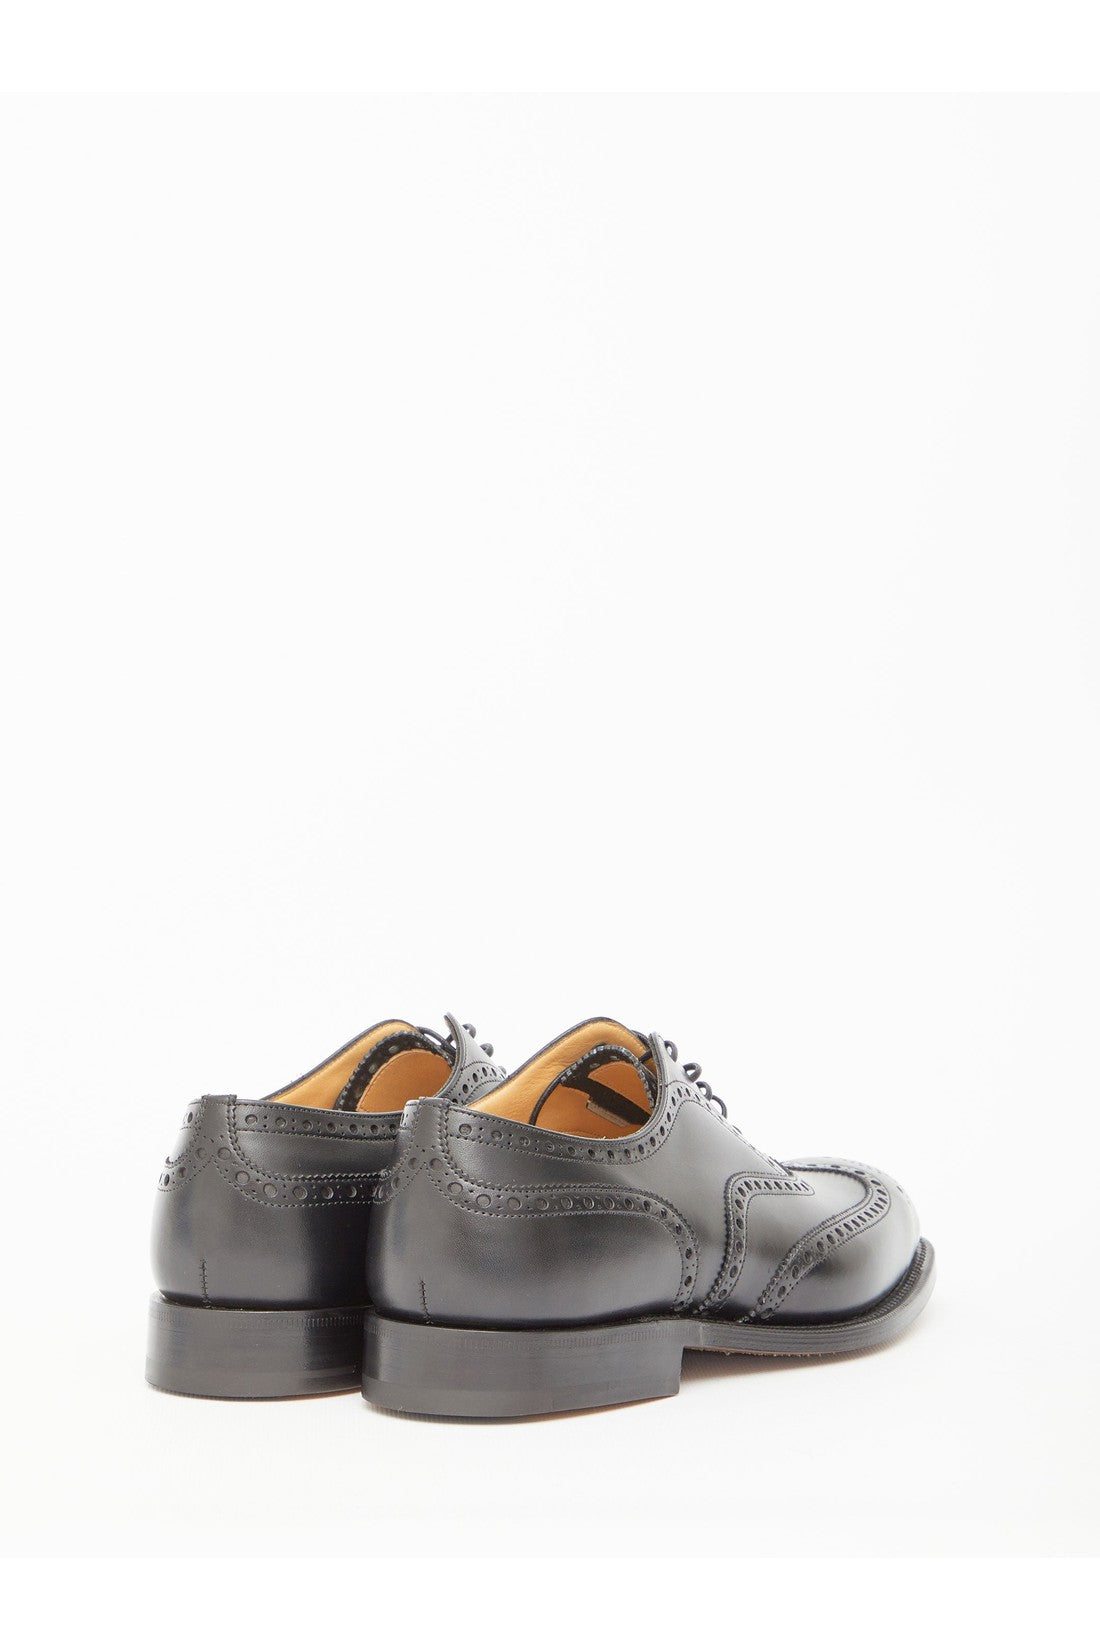 Chetwynd Oxford shoes